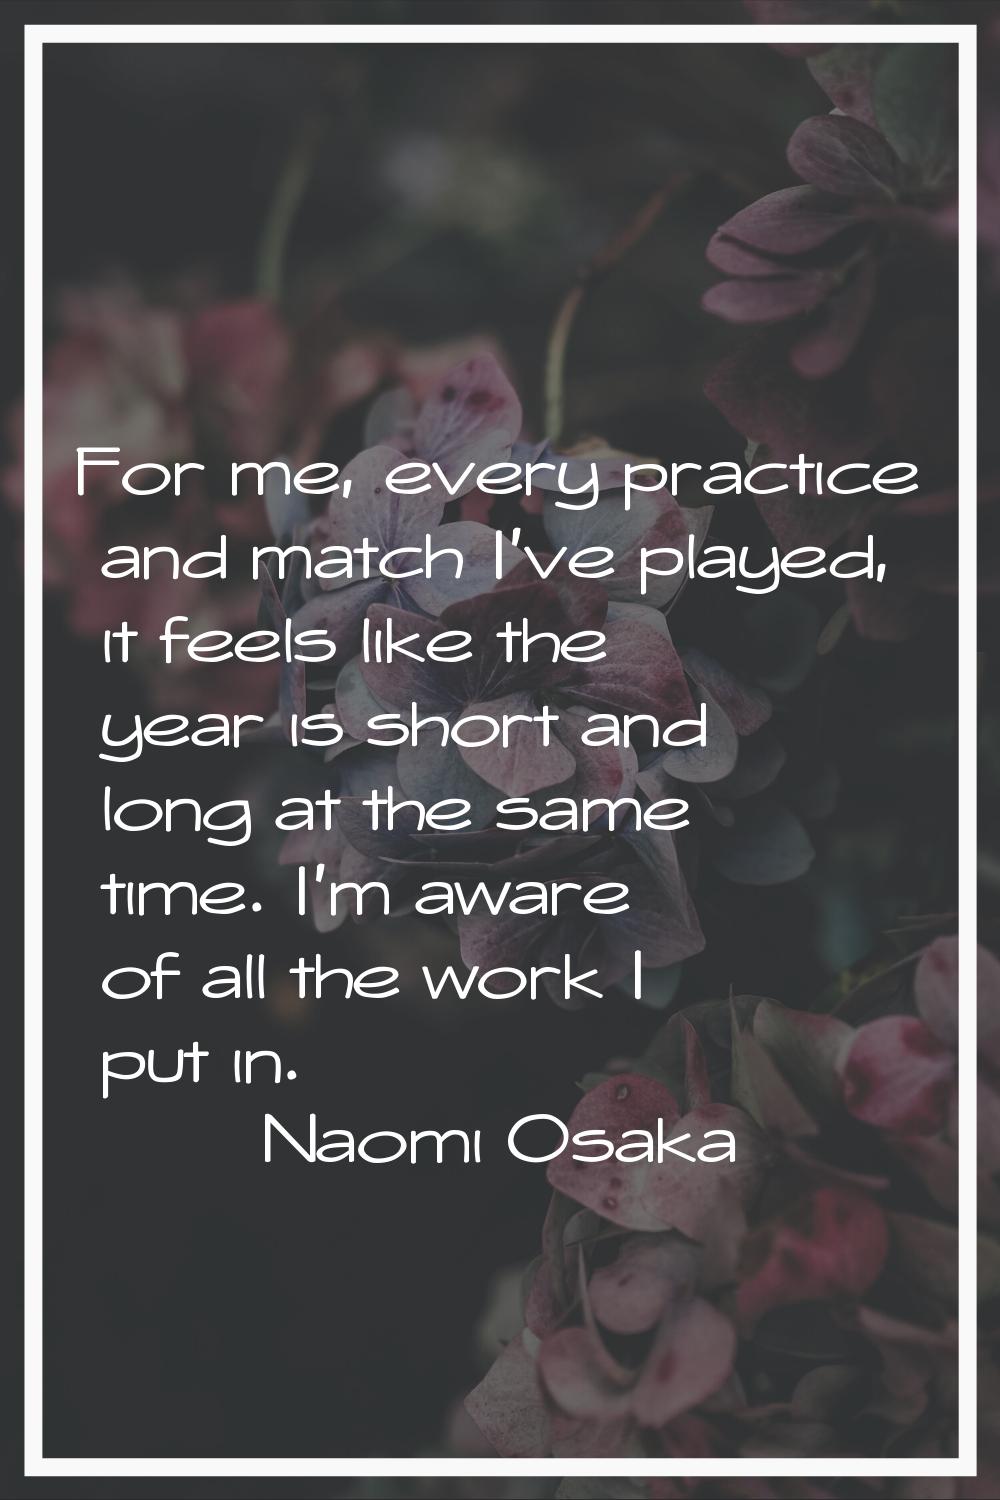 For me, every practice and match I've played, it feels like the year is short and long at the same 